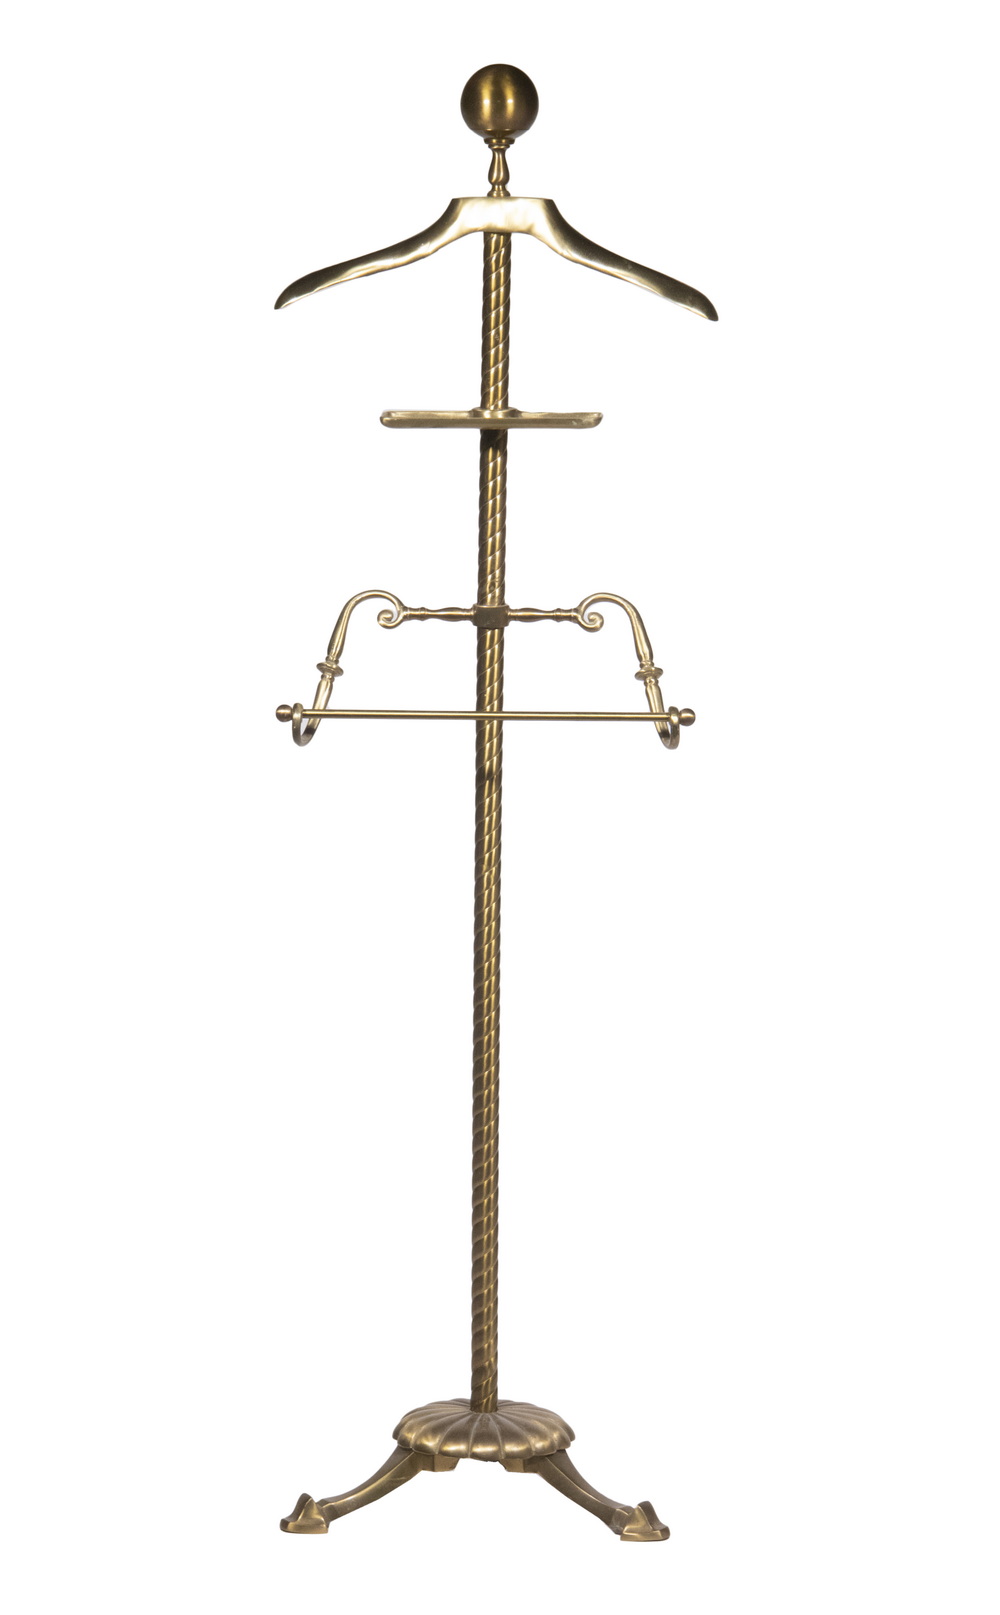 HEAVY CAST BRASS VALET STAND, 20TH C.